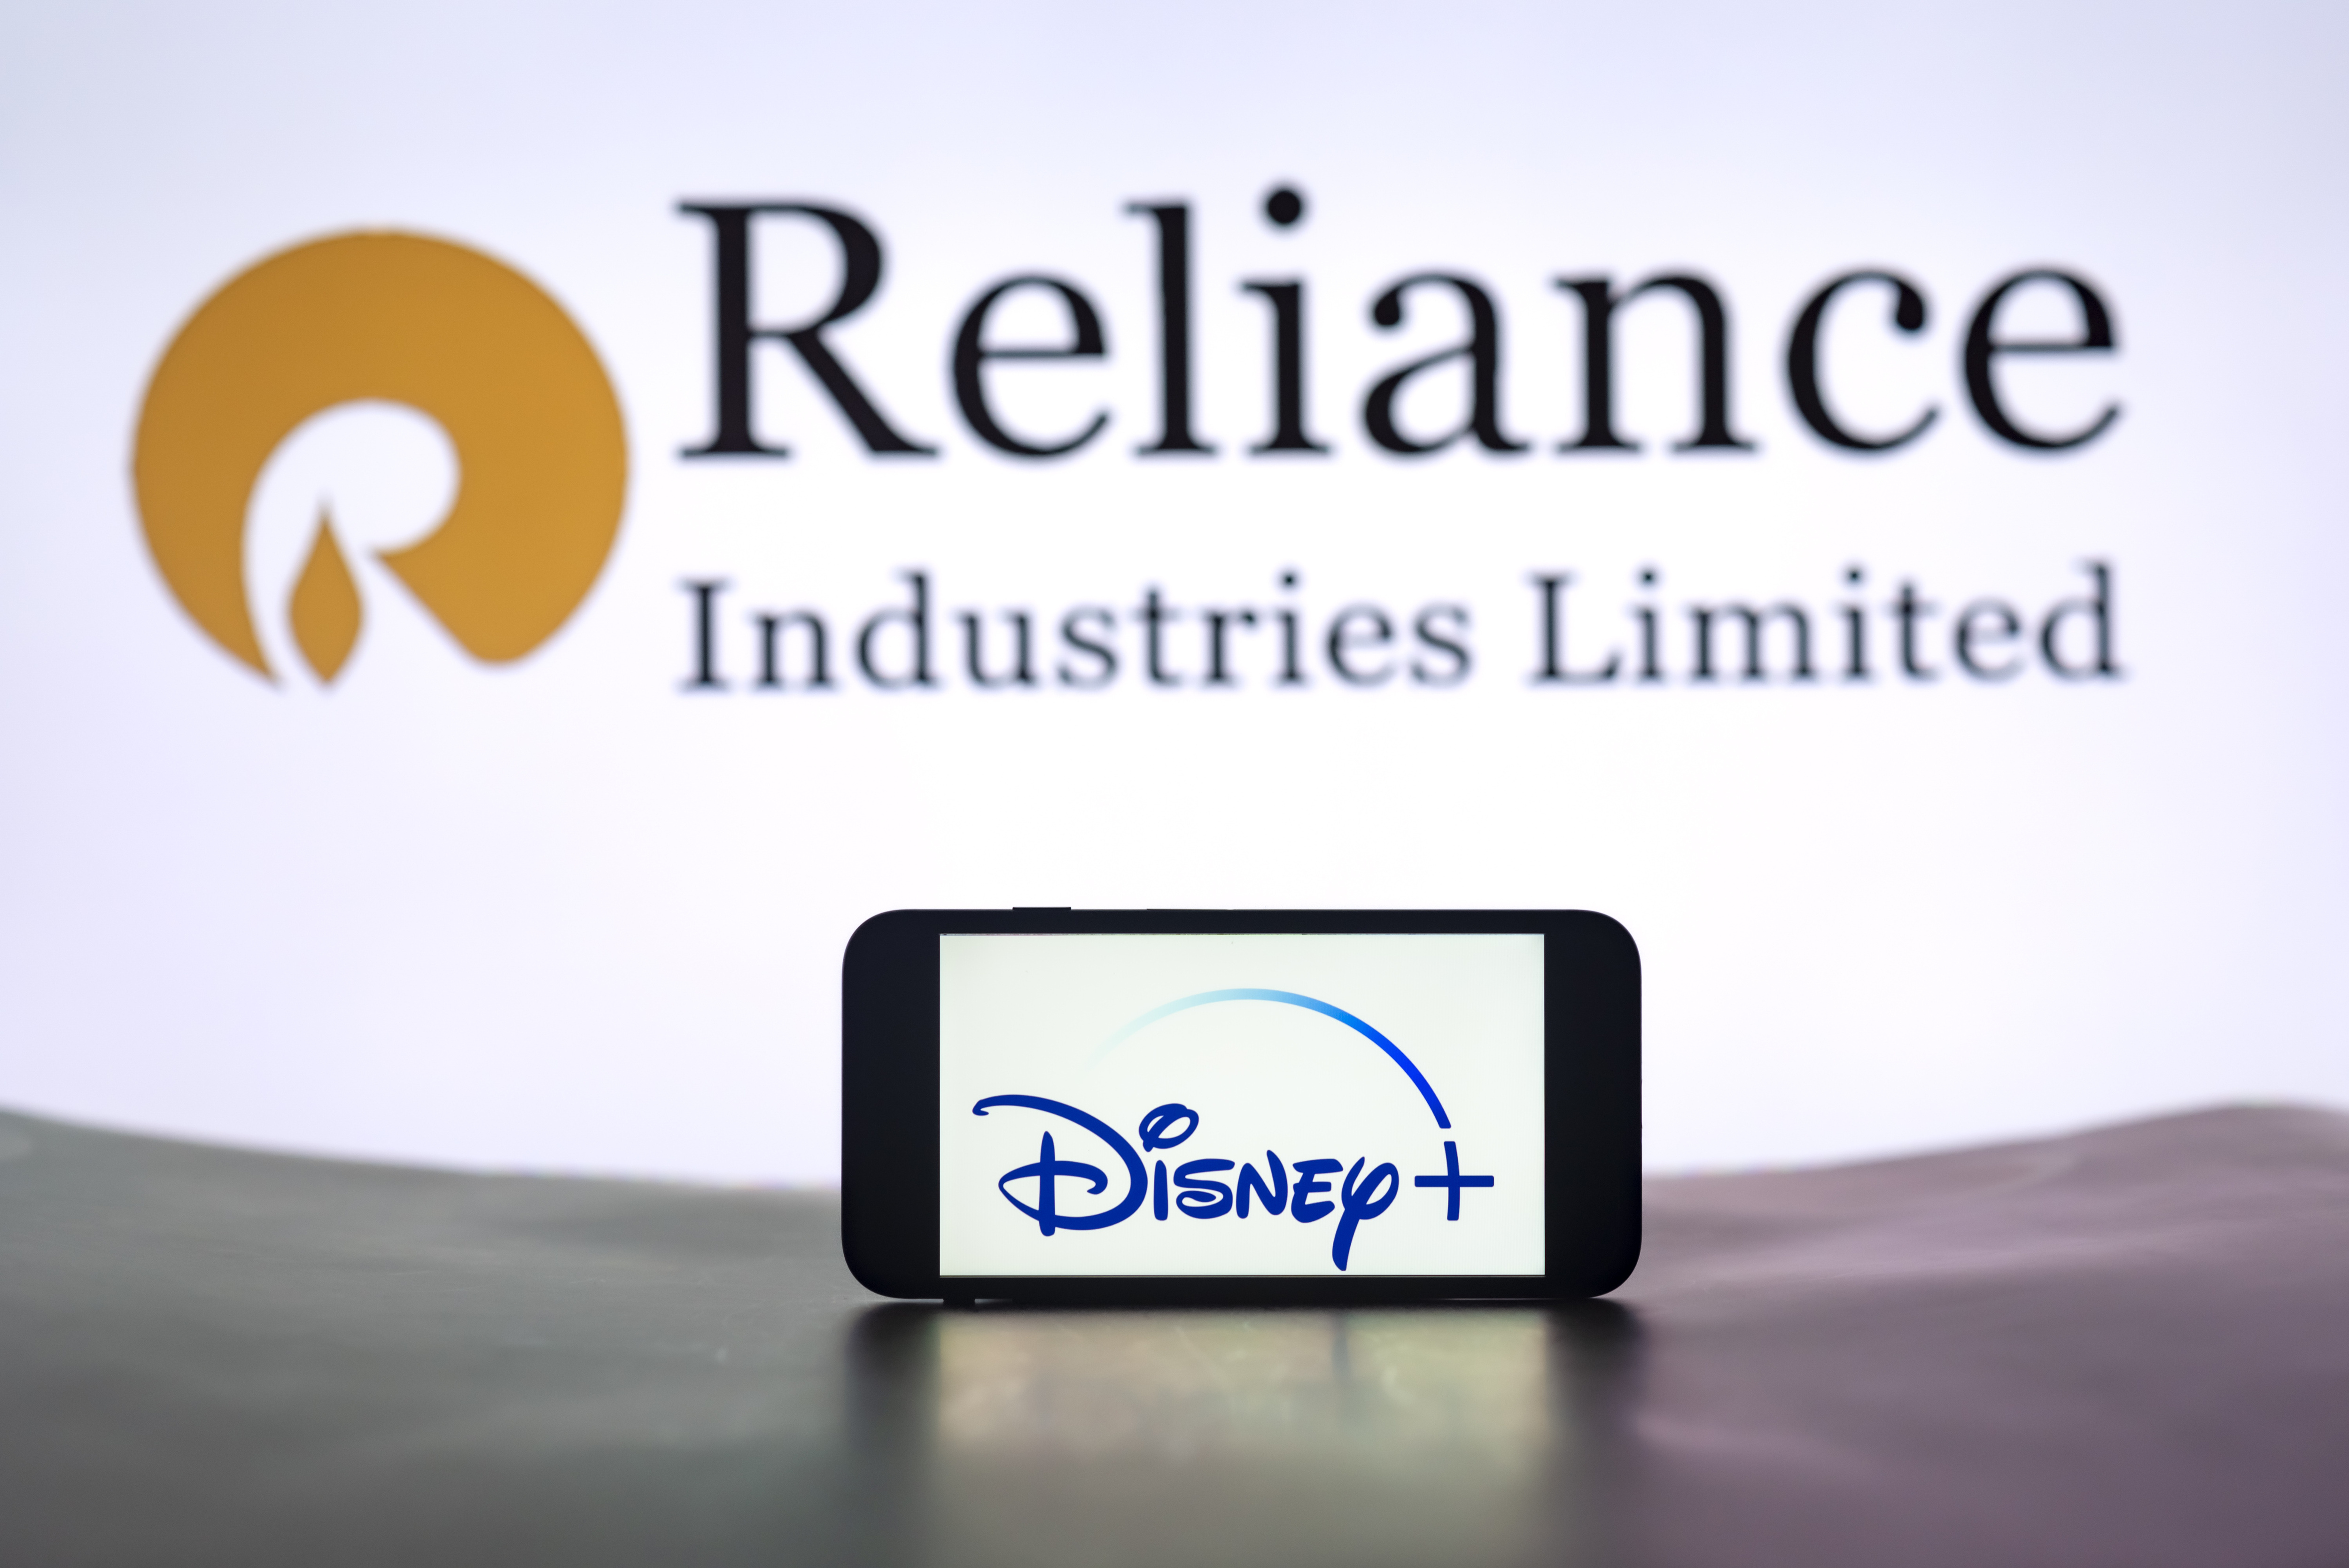 Disney, Reliance Sign $8.5 Billion Deal to Merge India Media Operations